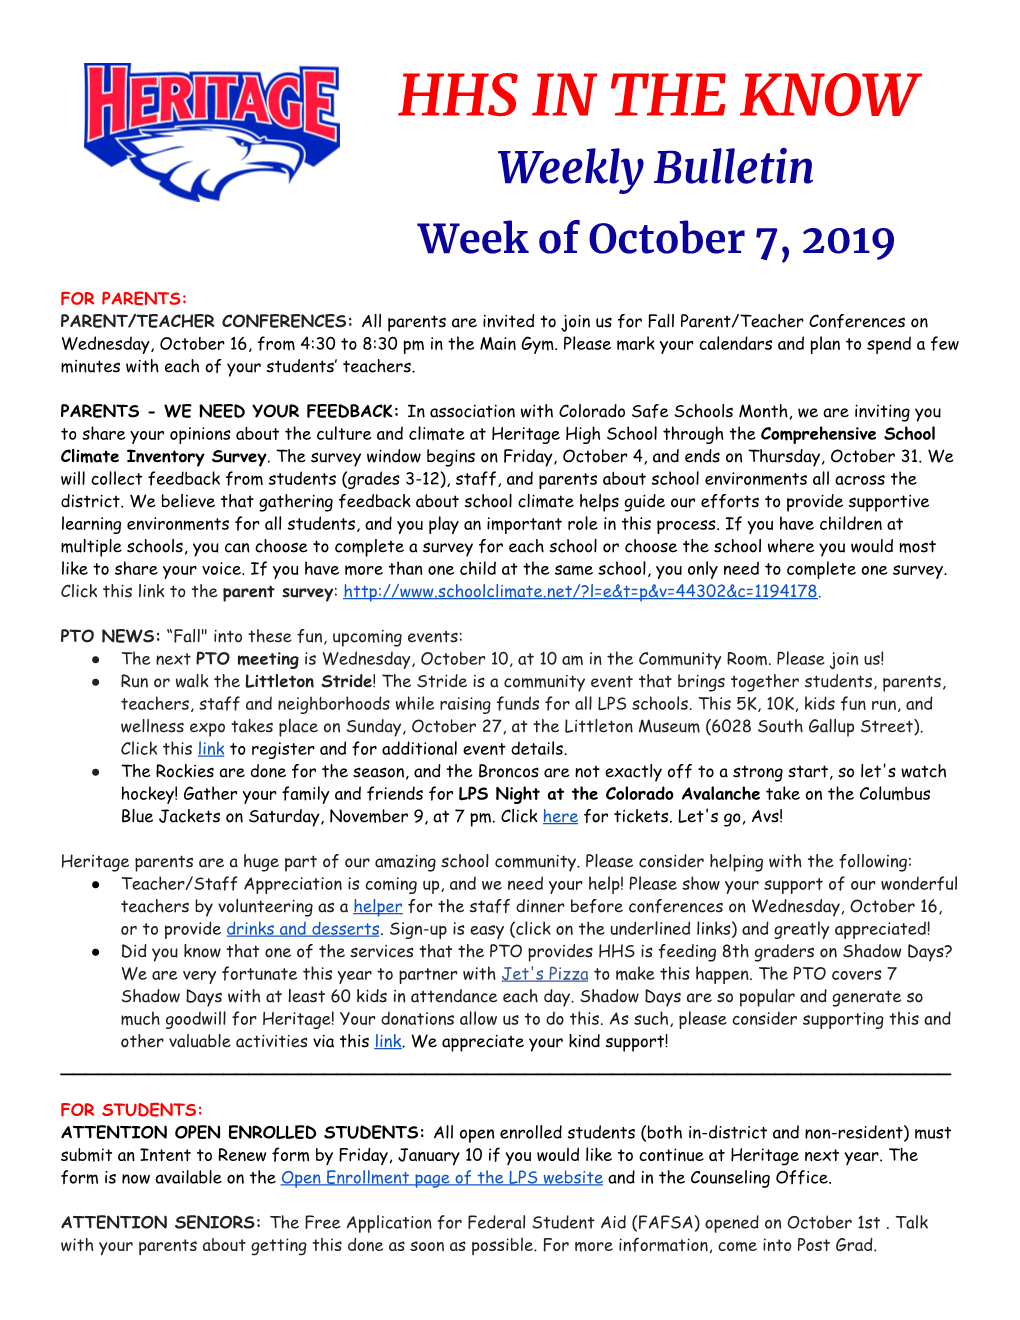 HHS in the KNOW Weekly Bulletin